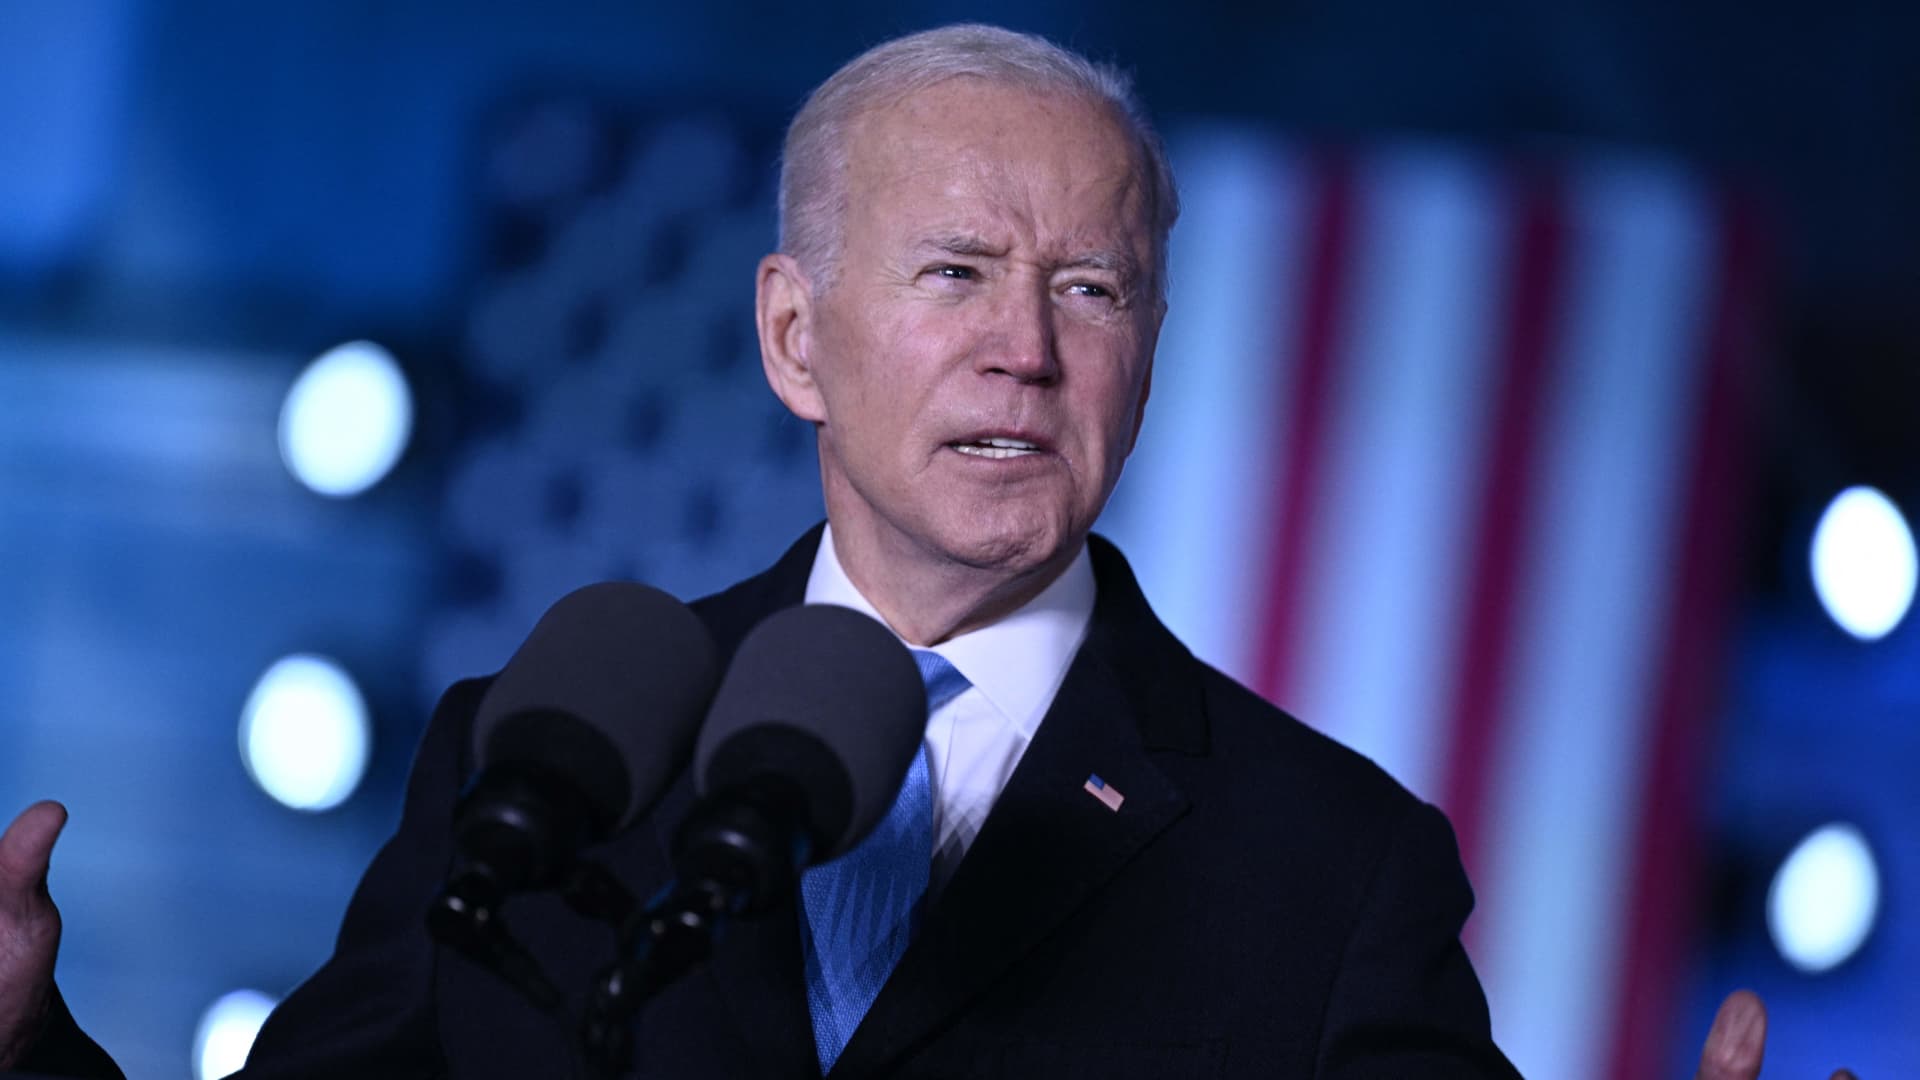 Biden’s job approval rating hits lowest point of his presidency as most Americans think the U.S. headed in the wrong direction